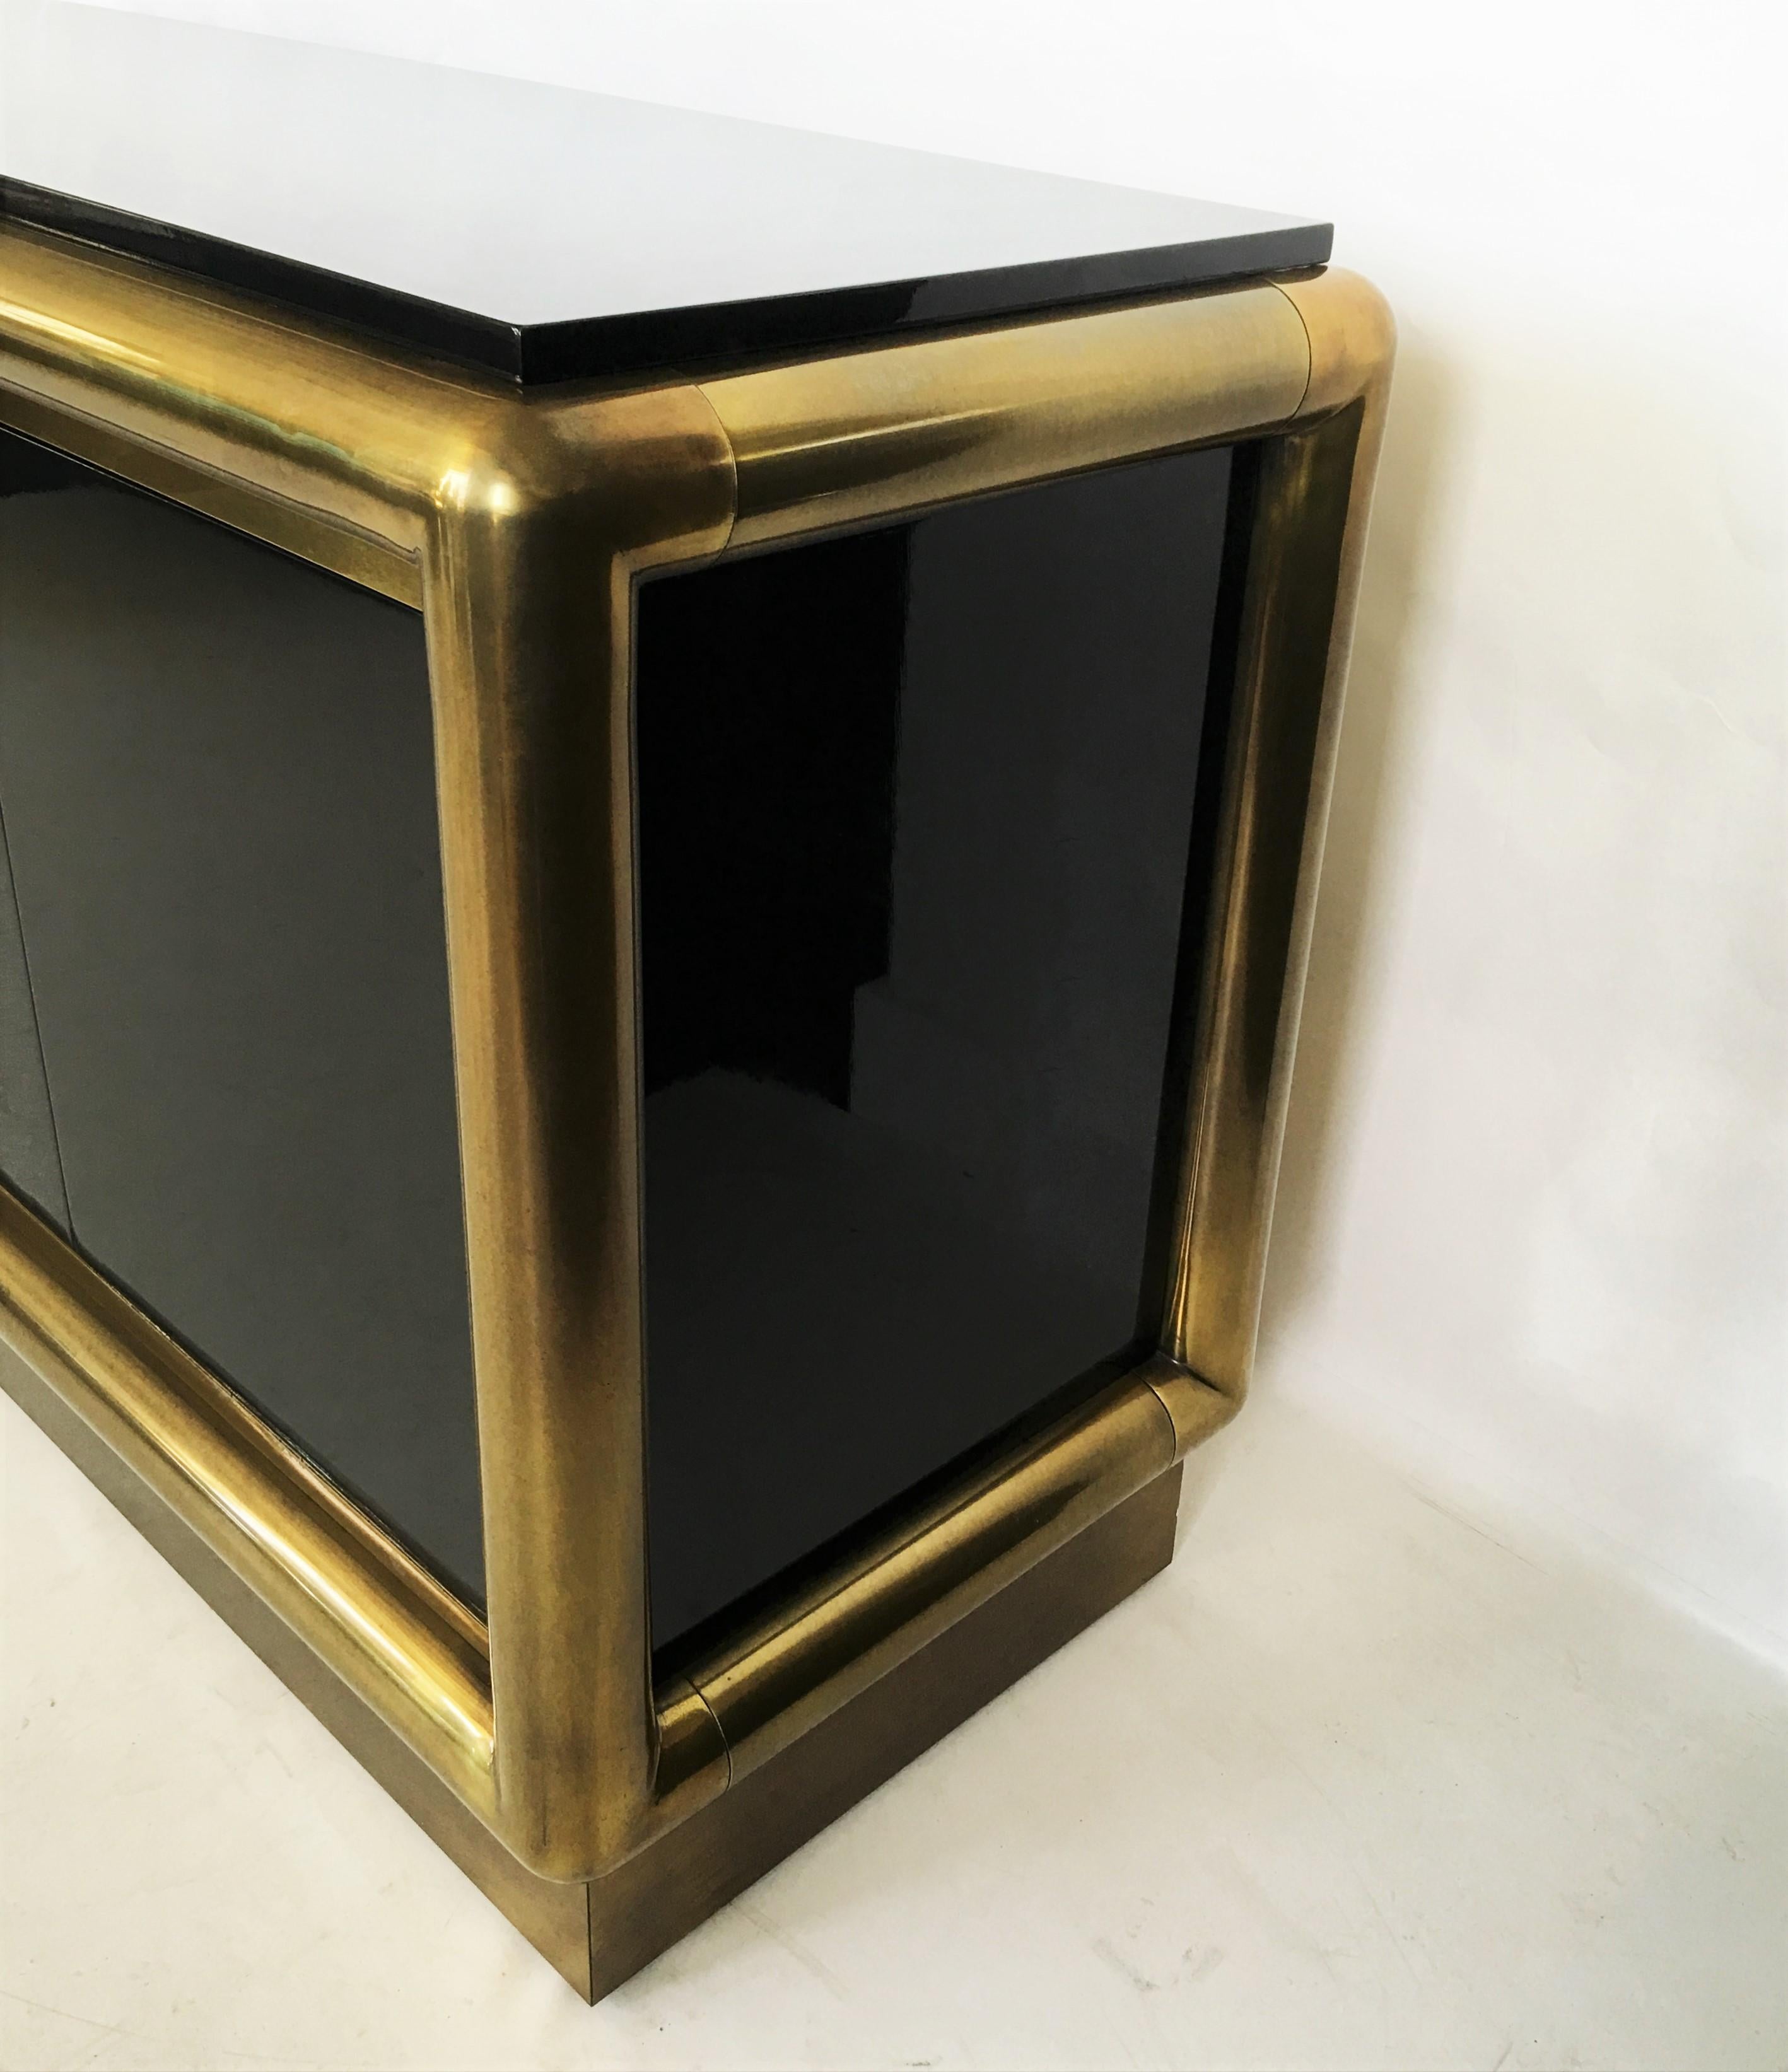 Late 20th Century Black Lacquer and Brass Credenza/Sideboard by Mastercraft For Sale